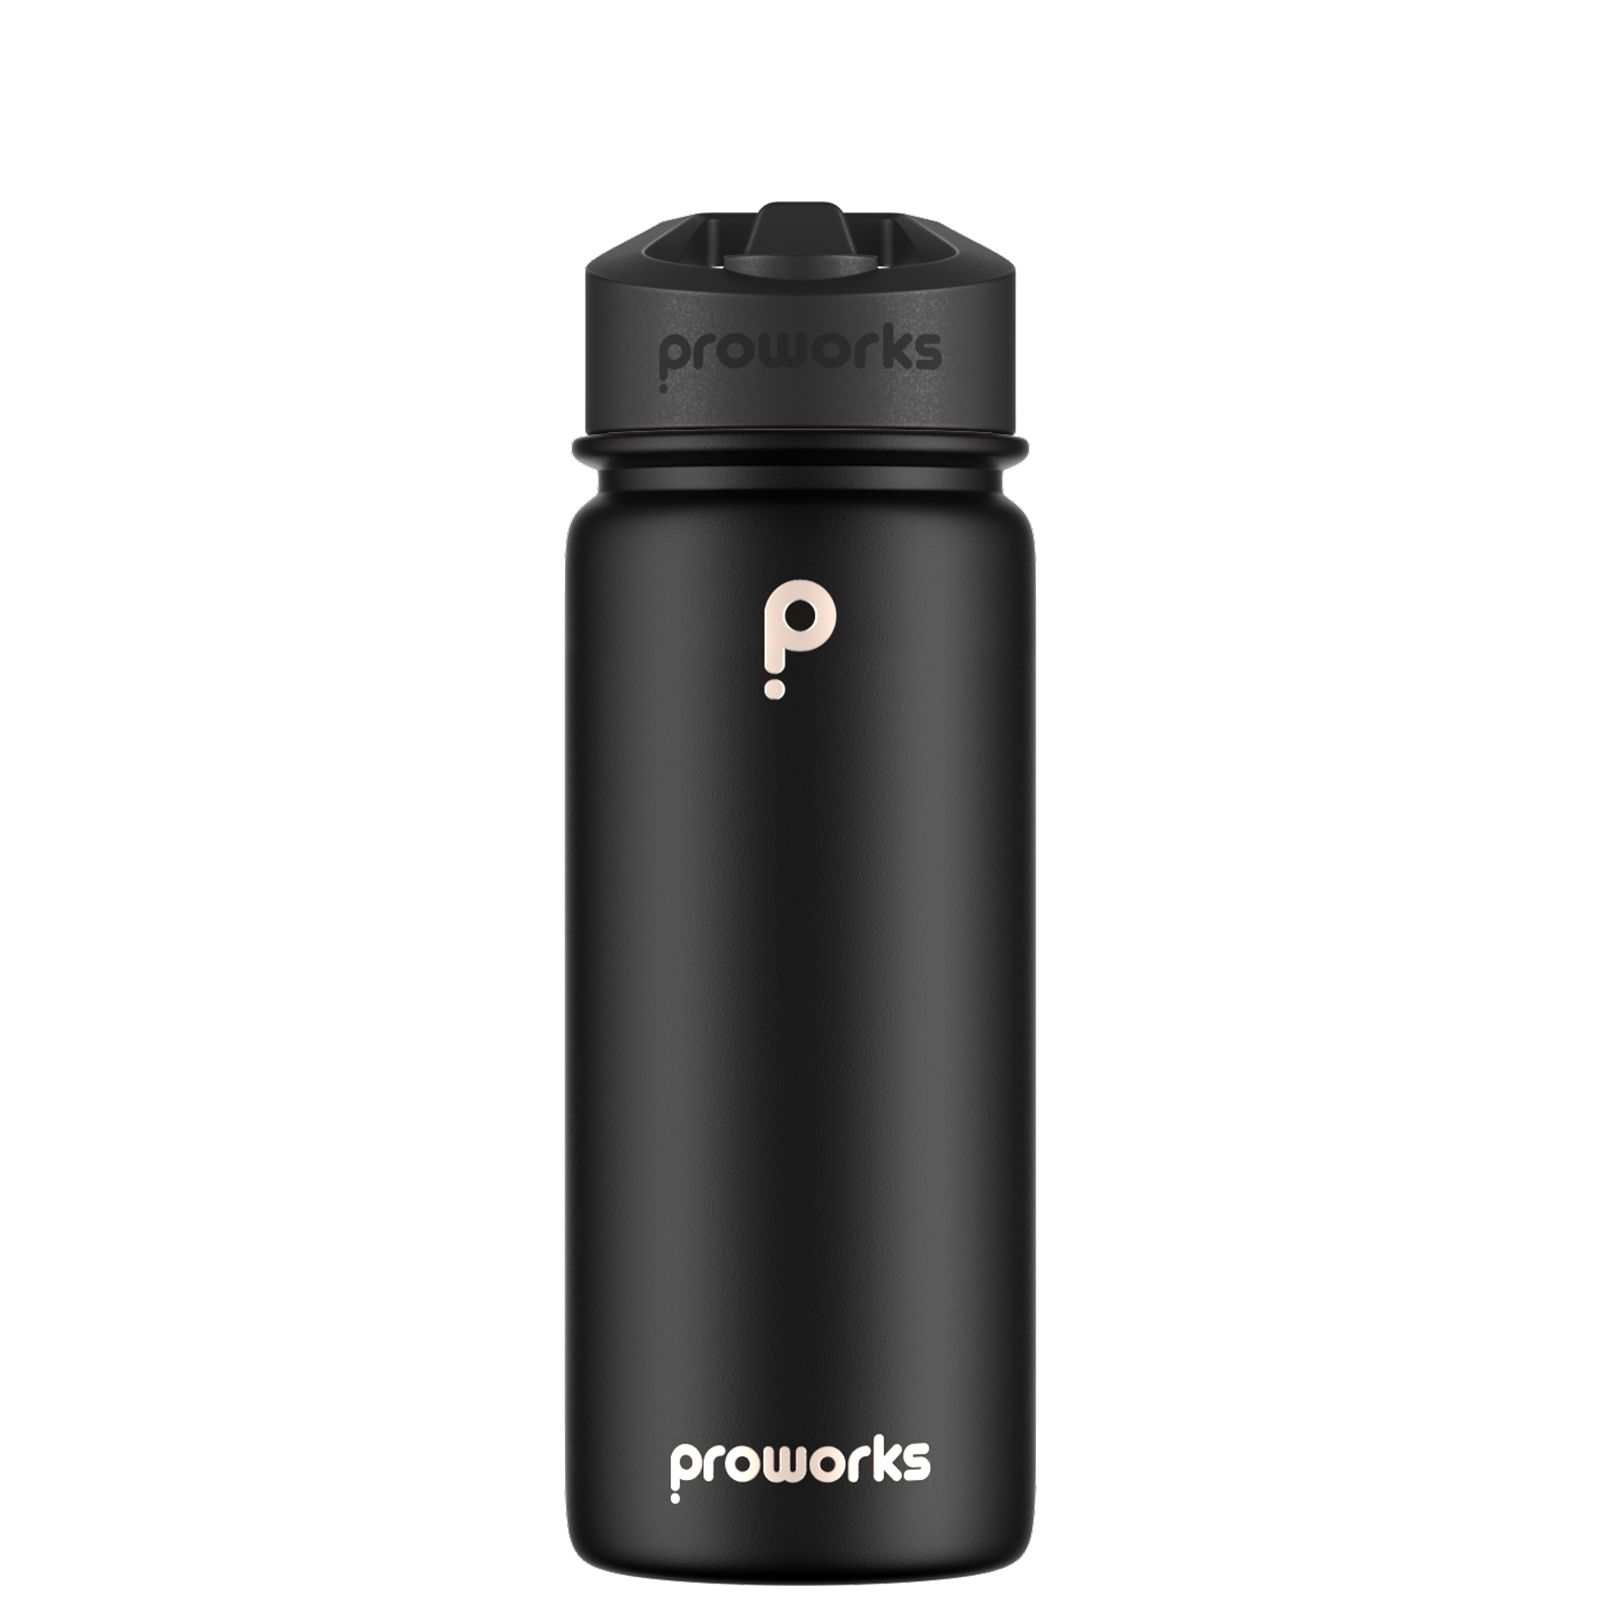 https://cdn.shopify.com/s/files/1/0017/0714/7328/products/Proworks-JetBlack-540ml-Water-Bottle_1600x.png?v=1671097674